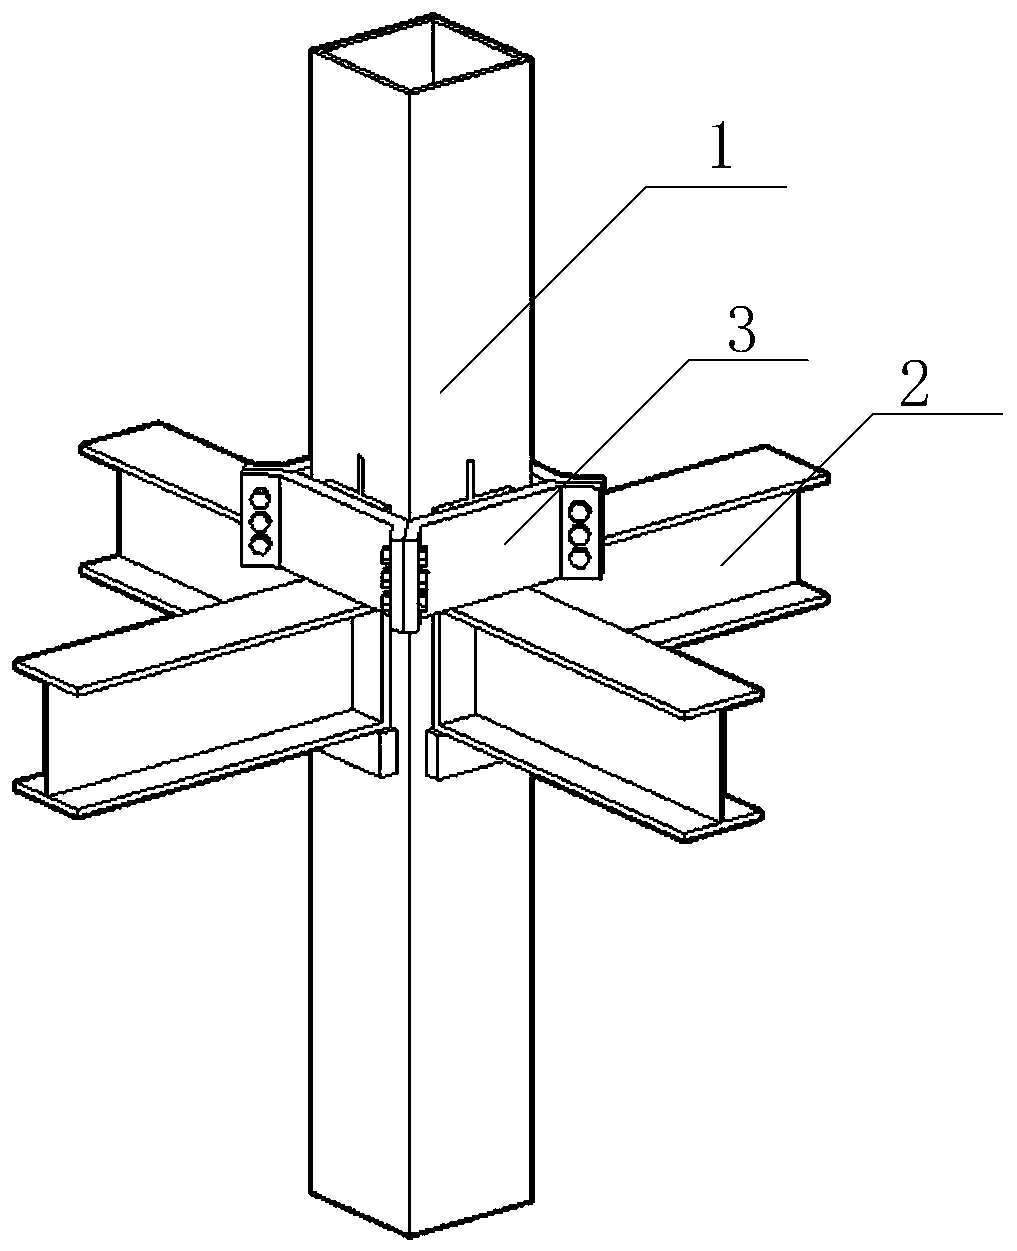 An assembled connection node between a plug-in buckle beam and a column